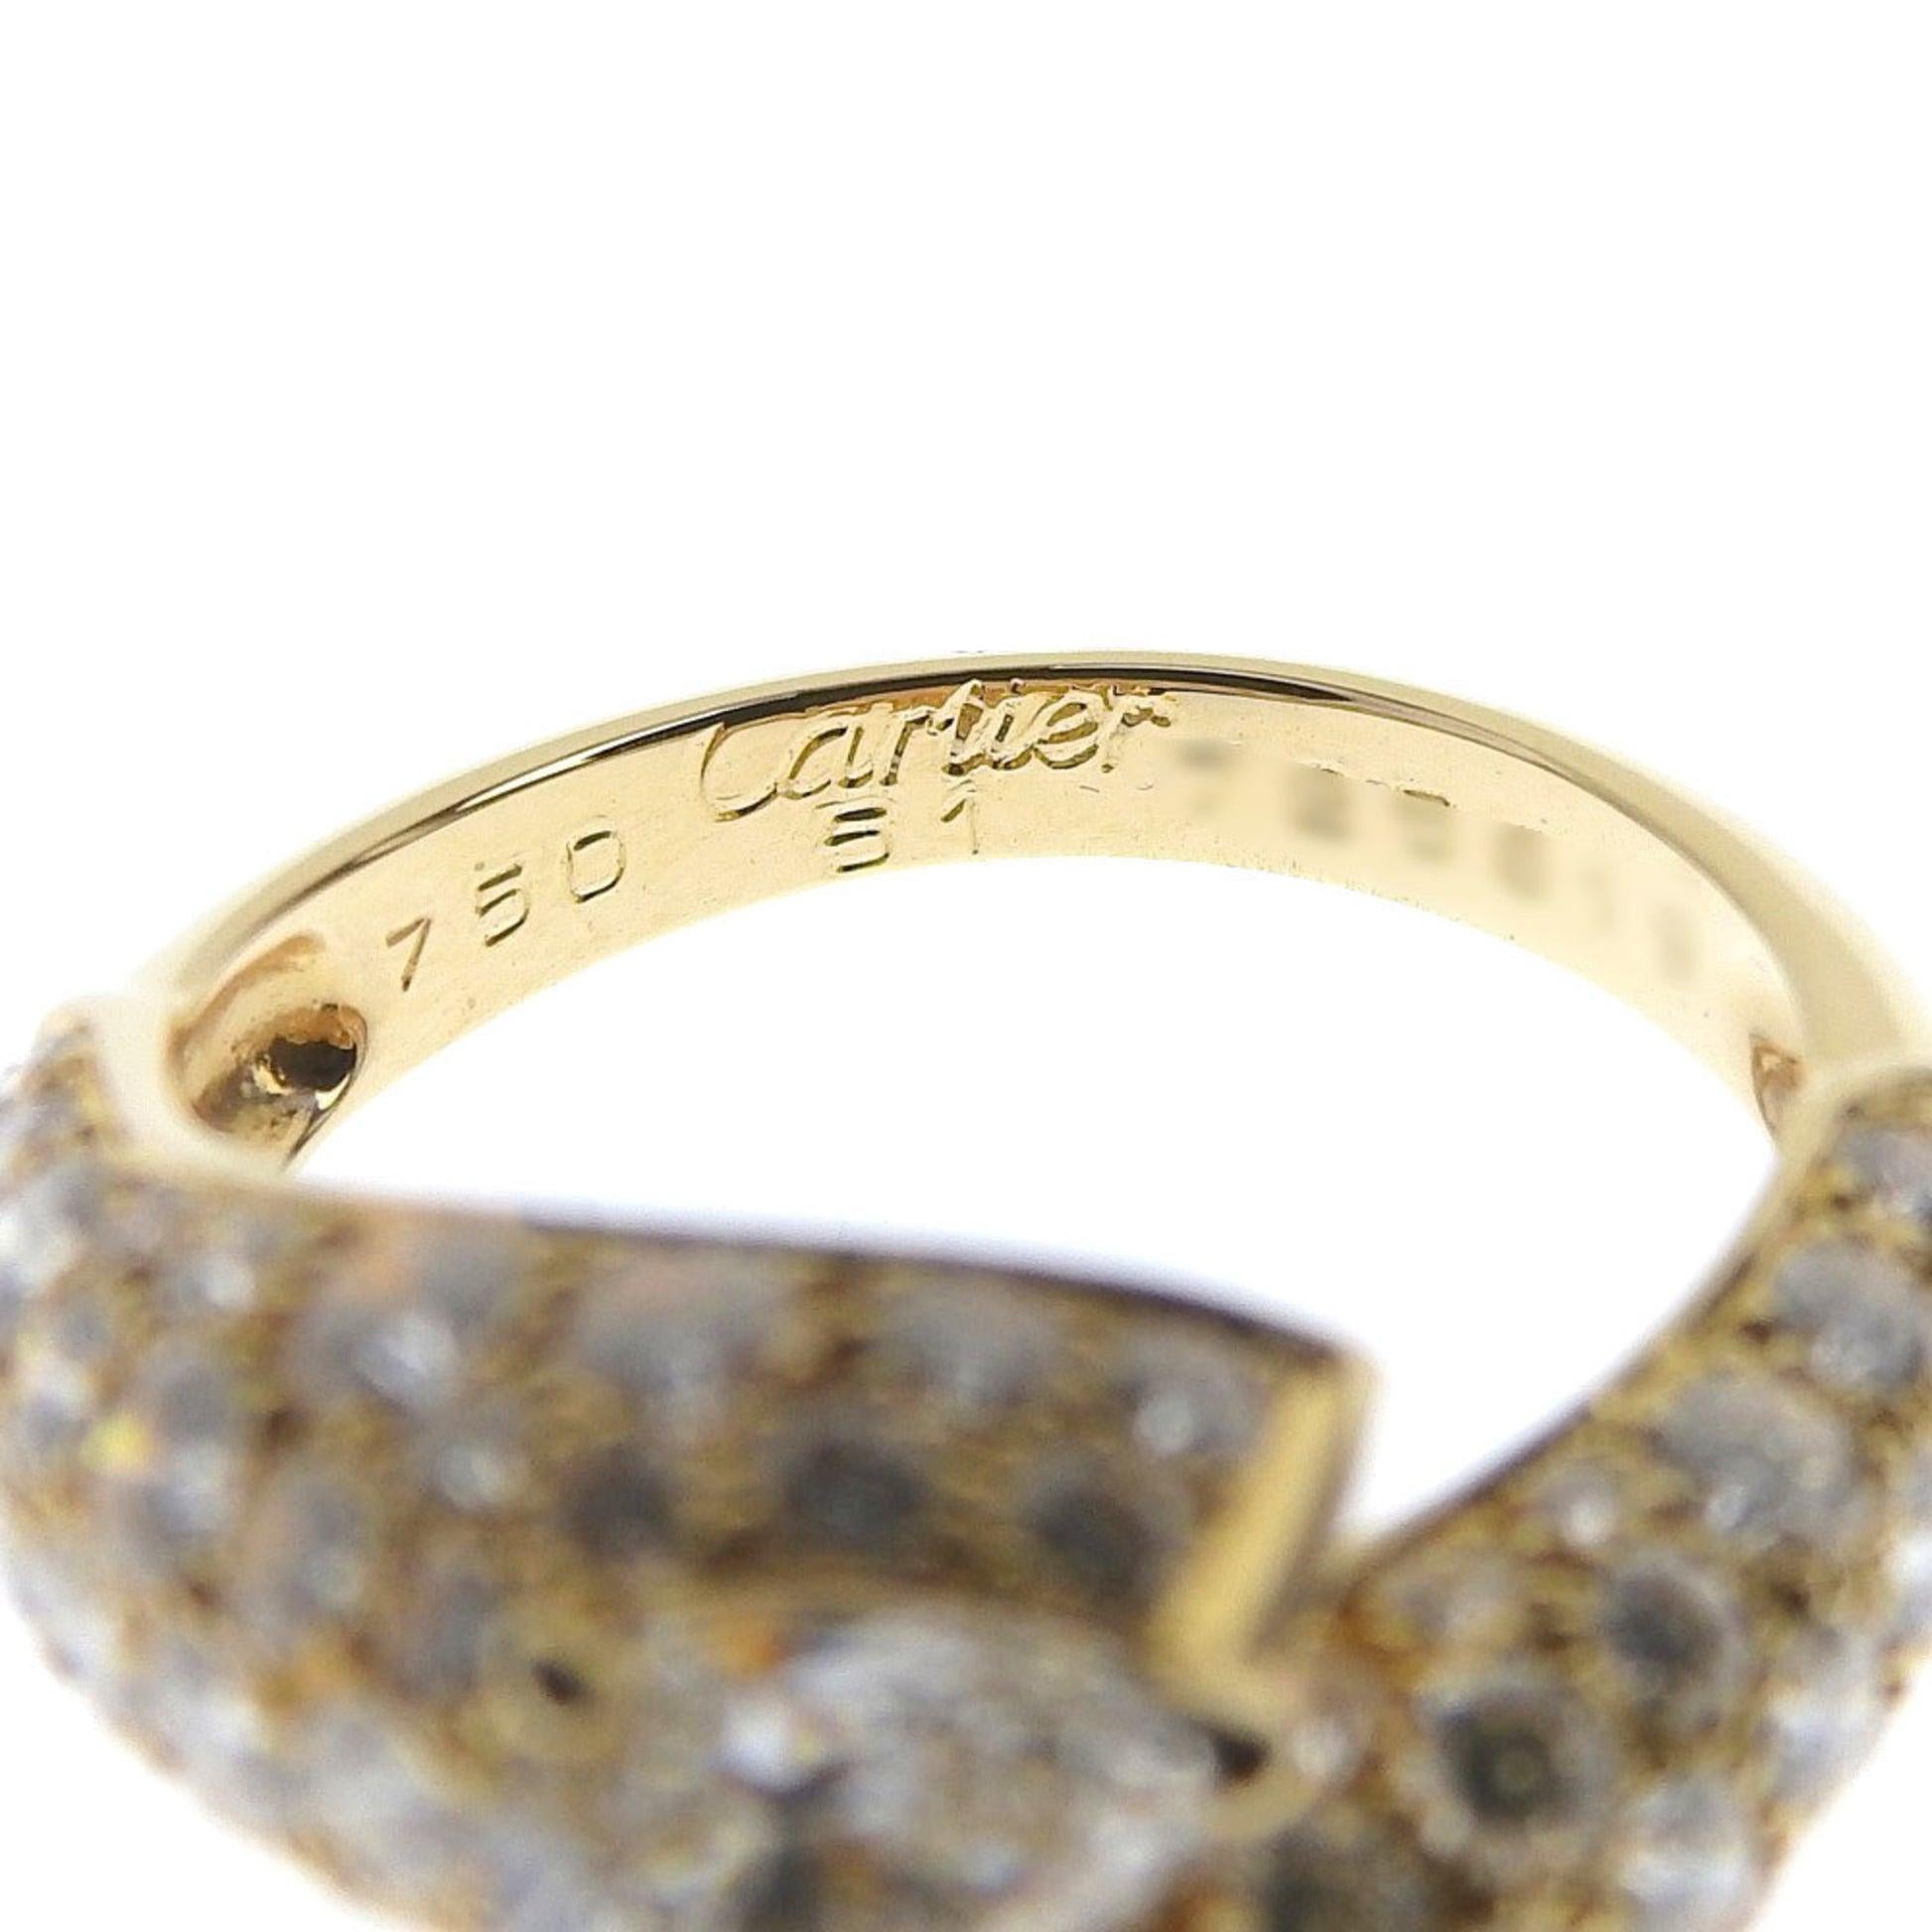 Cartier Diamond Ring in 18K Yellow Gold

Additional Information:
Brand: Cartier
Gender: Women
Gemstone: Diamond
Material: Yellow gold (18K)
Ring size (US): 6
Condition: Excellent
Condition details: The item appears unused, with little to no signs of